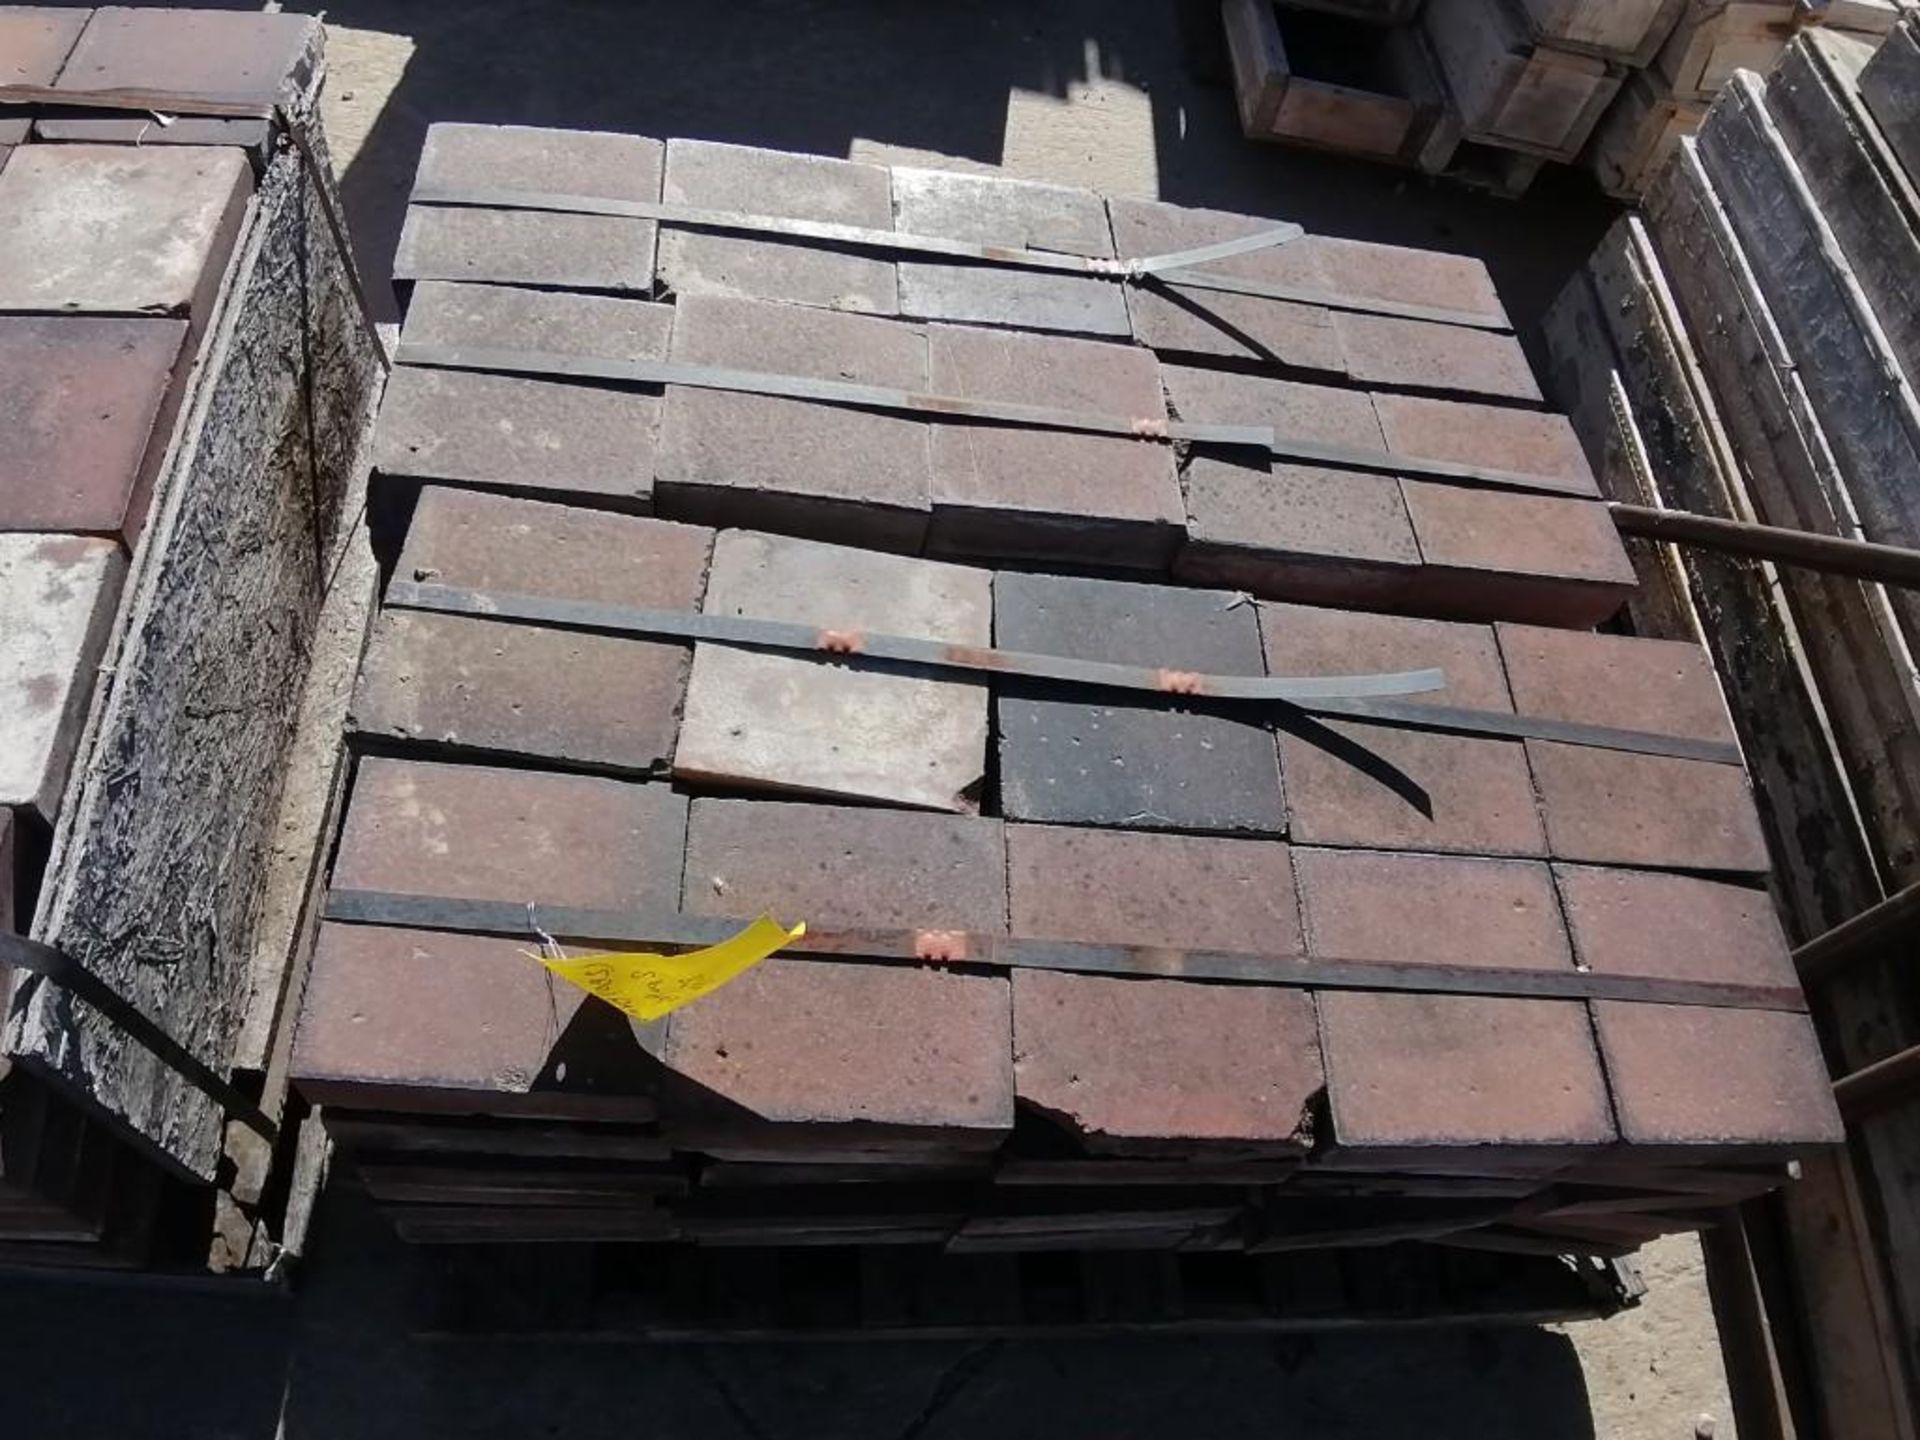 Lot of (2) Pallets with 280 total 8" x 8" Paving Bricks. Located in Hazelwood, MO. - Image 4 of 5